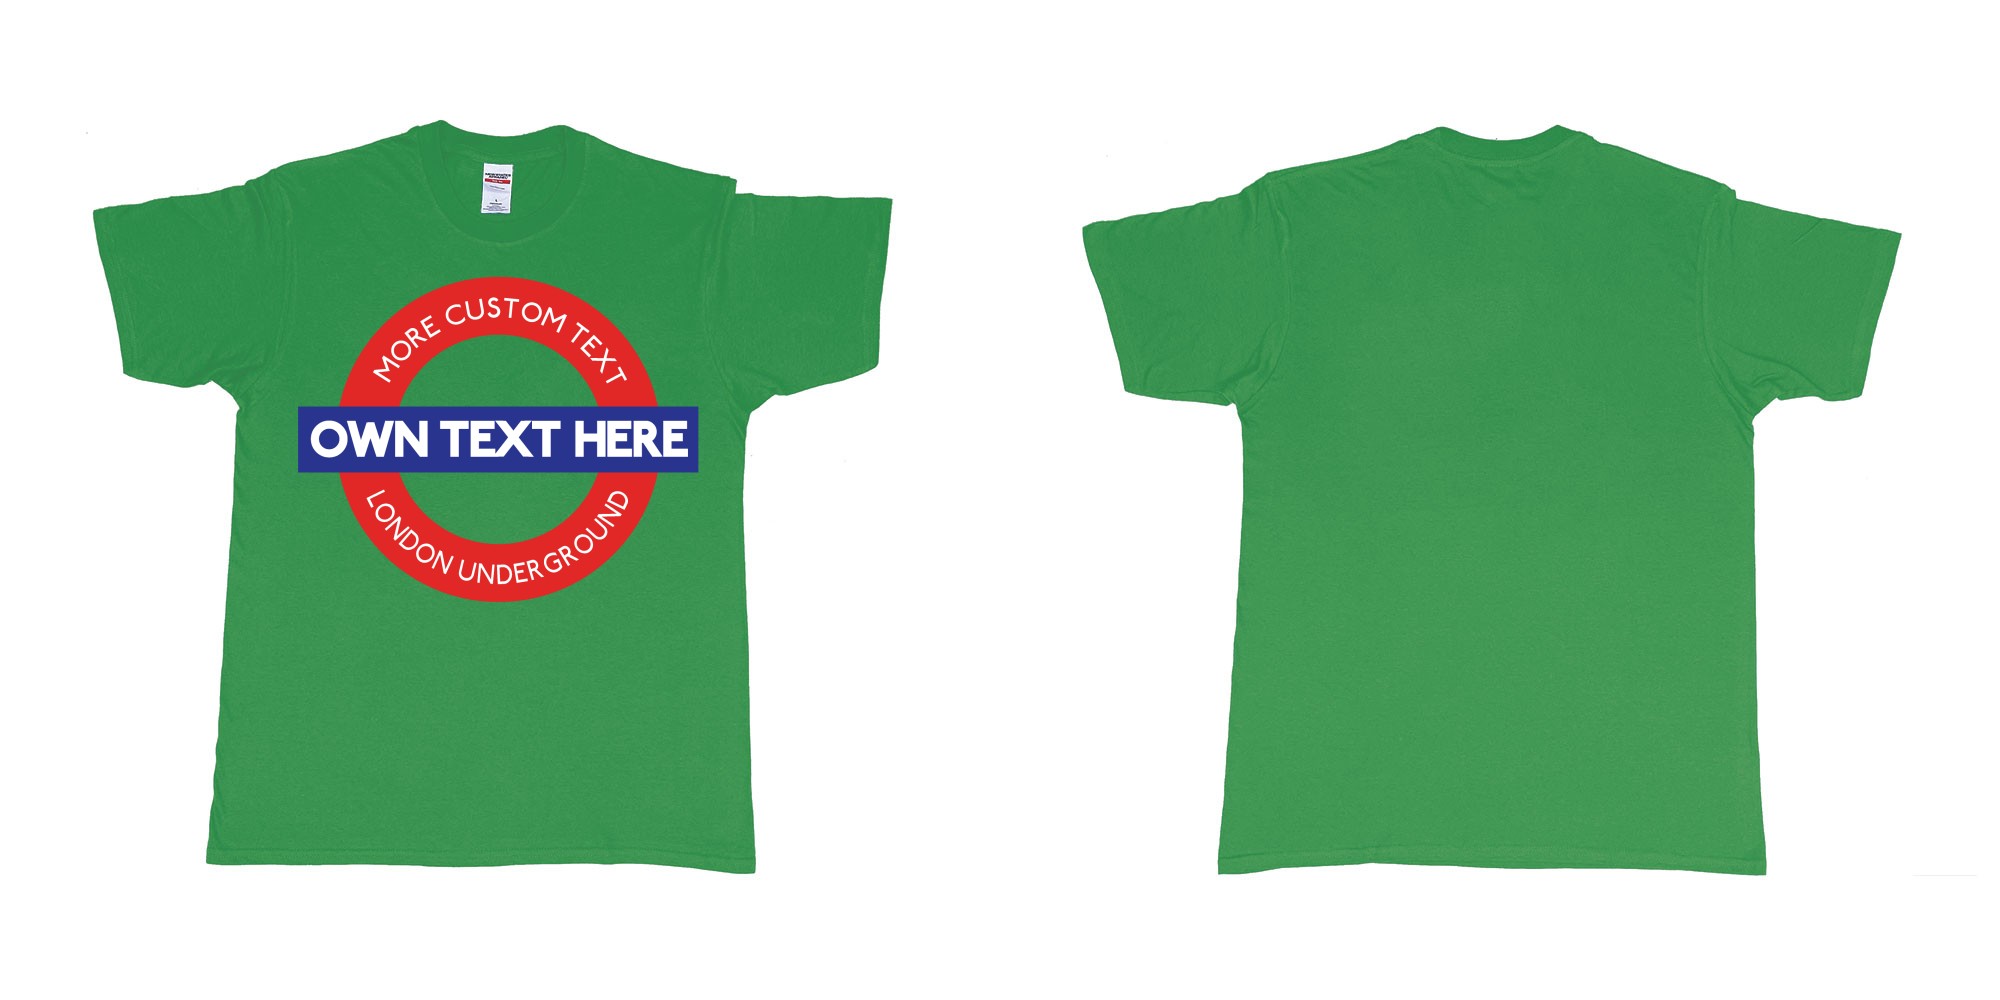 Custom tshirt design london underground logo custom design in fabric color irish-green choice your own text made in Bali by The Pirate Way